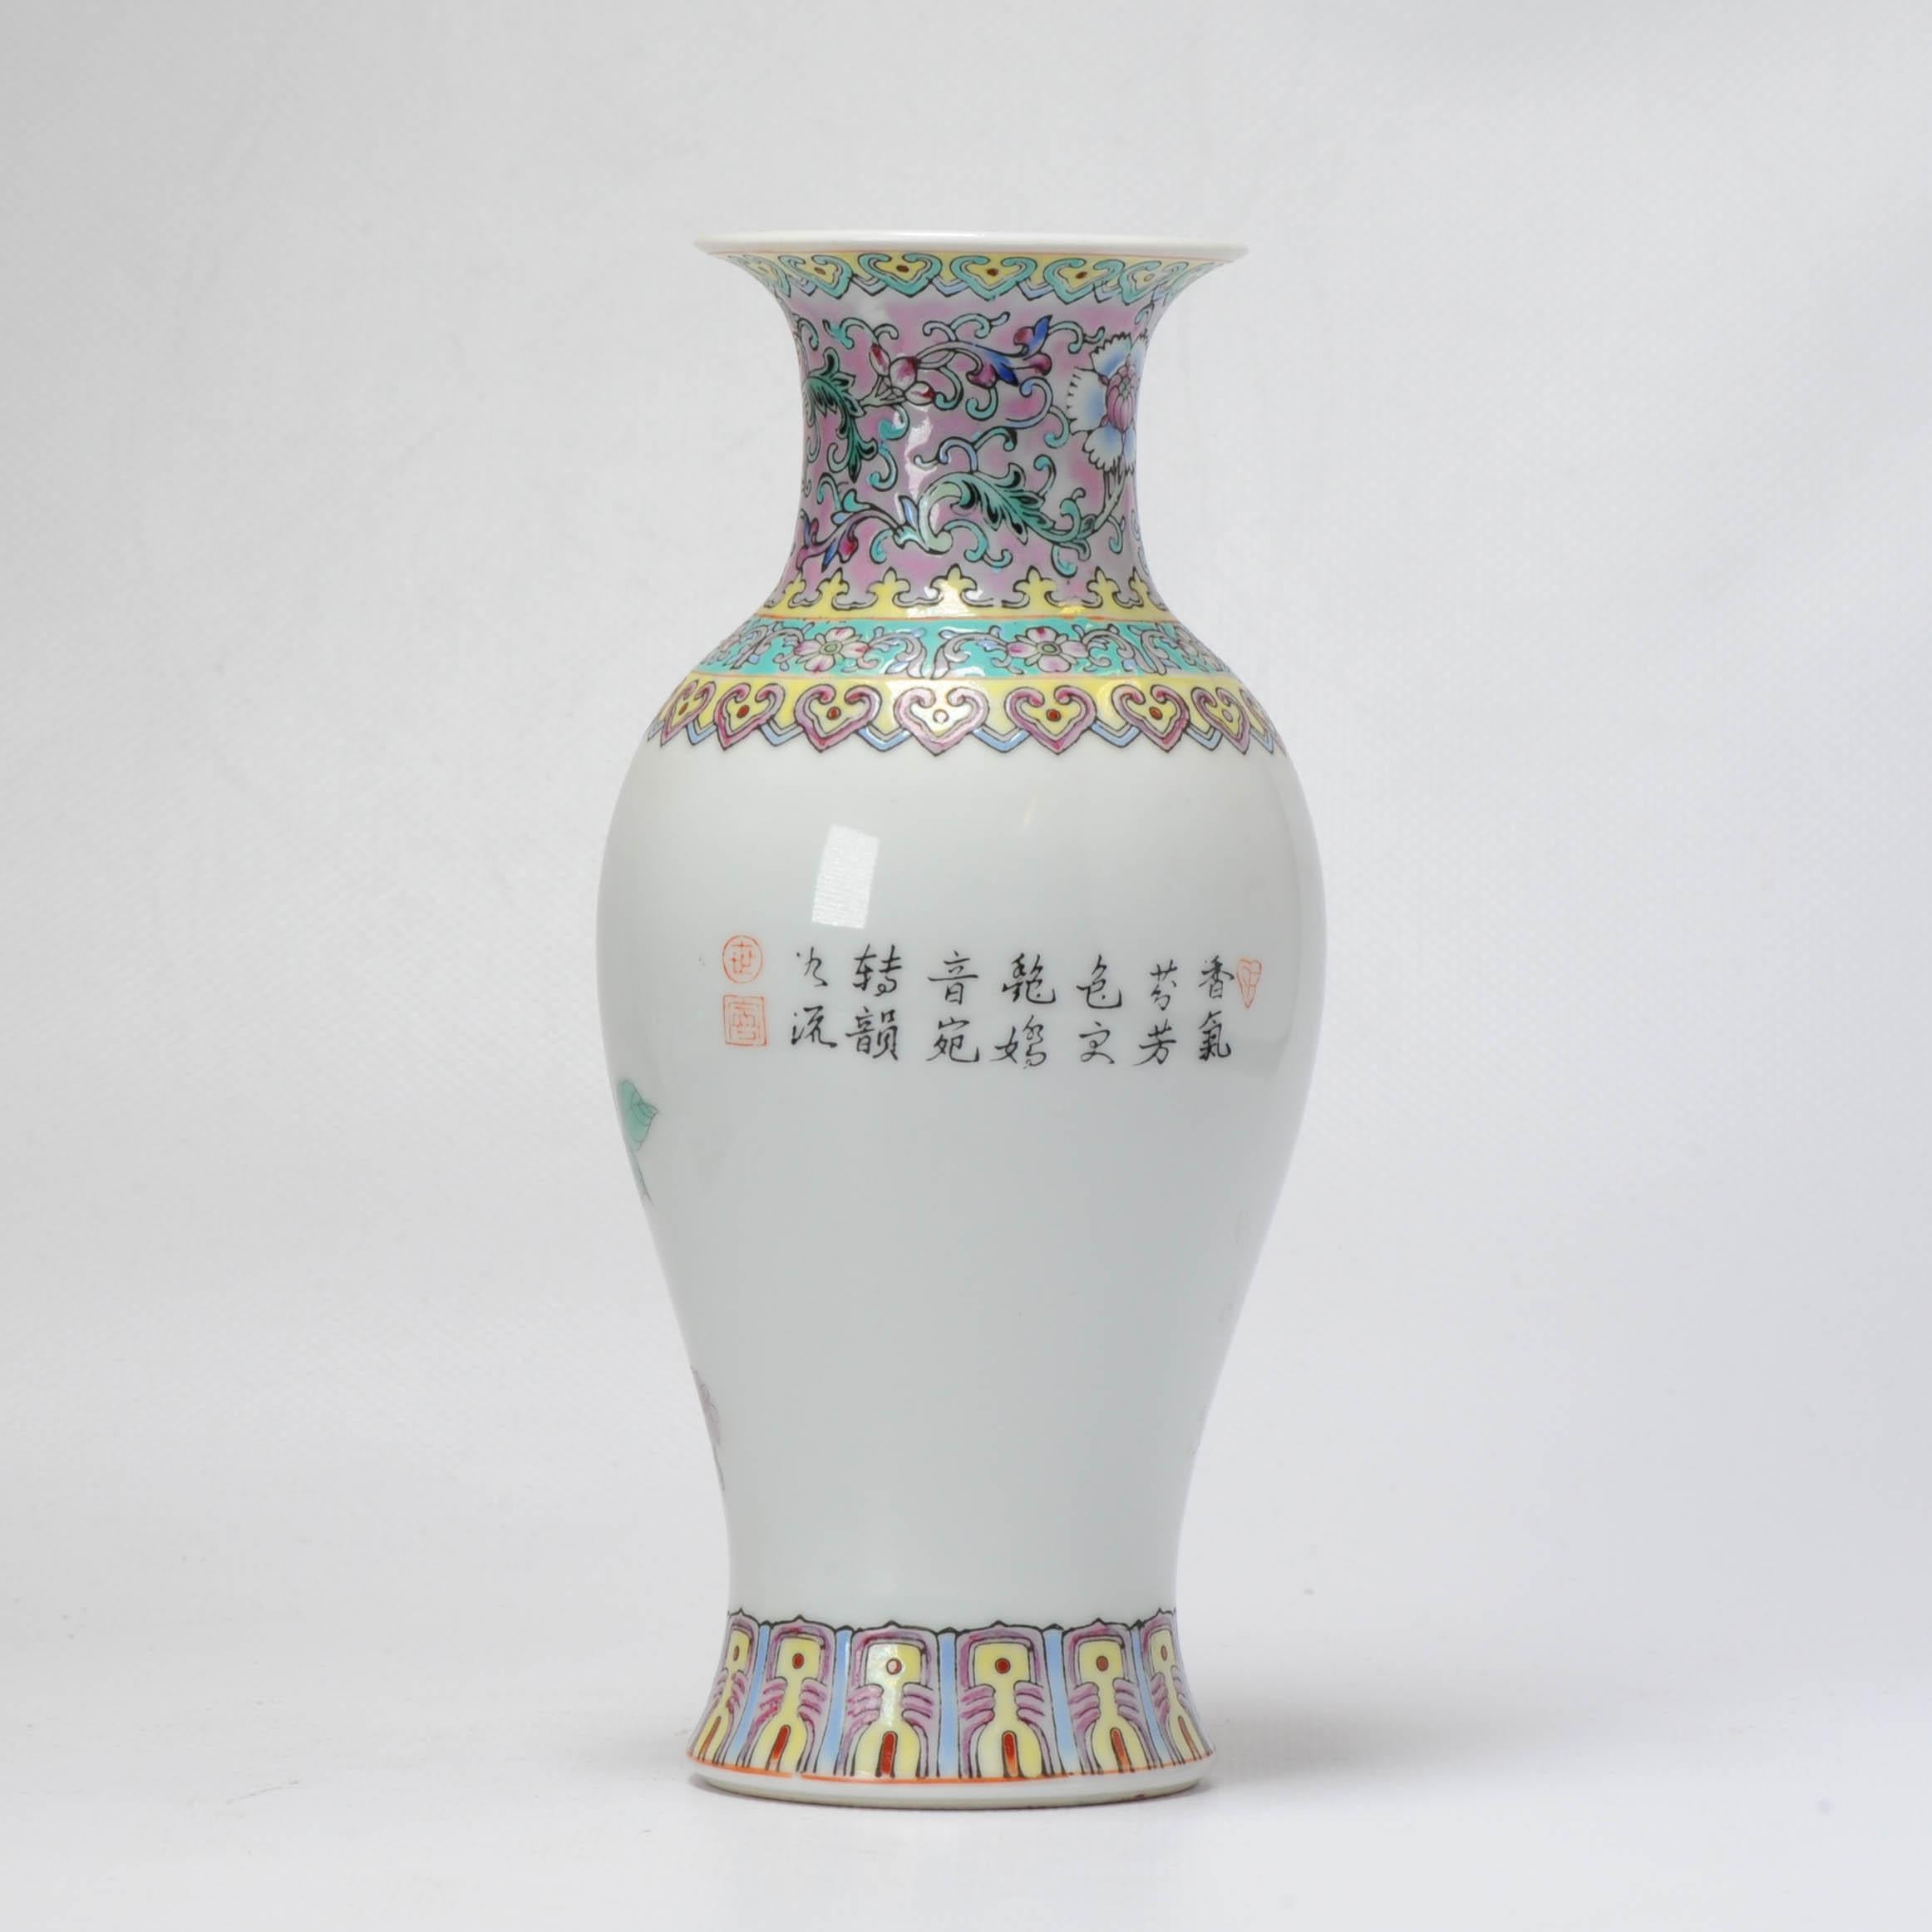 A polychrome porcelain vase. Marked with 4 character mark at base. China, 20th century.

Very nice and unusual scene.

Additional information:
Material: Porcelain & Pottery
Type: Vase
Region of Origin: China
Period: 20th century PRoC (1949 -